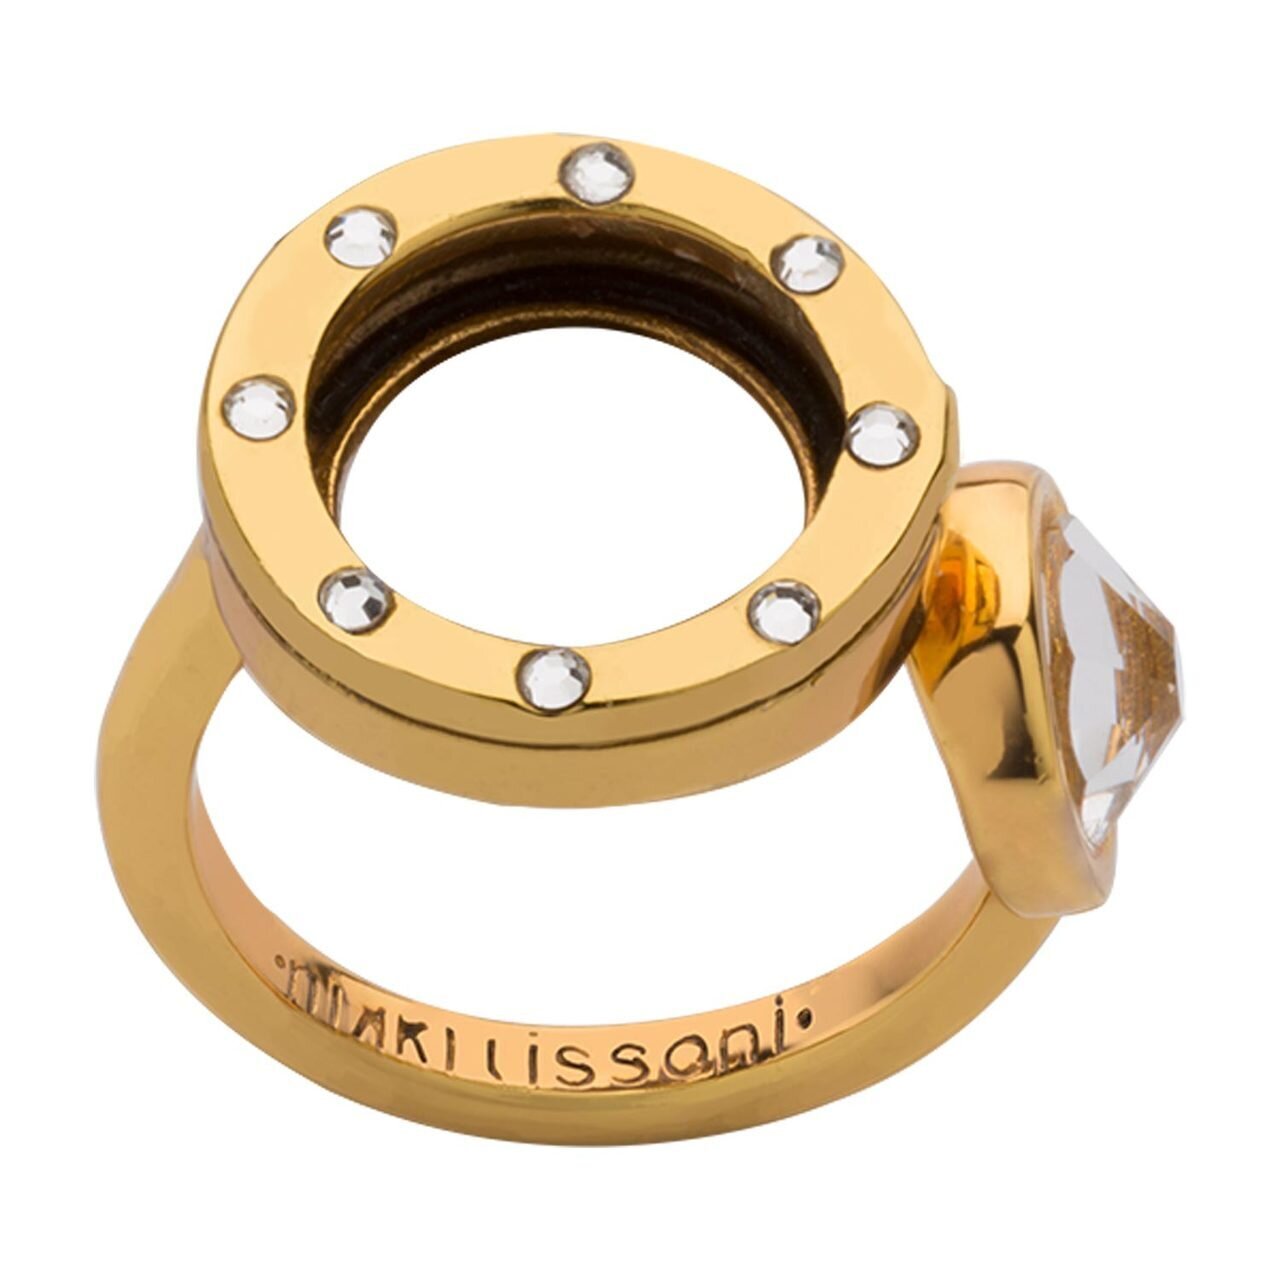 Nikki Lissoni Interchangeable Open Ring with Swarovski Stones Gold-plated Size 10 R1006G10